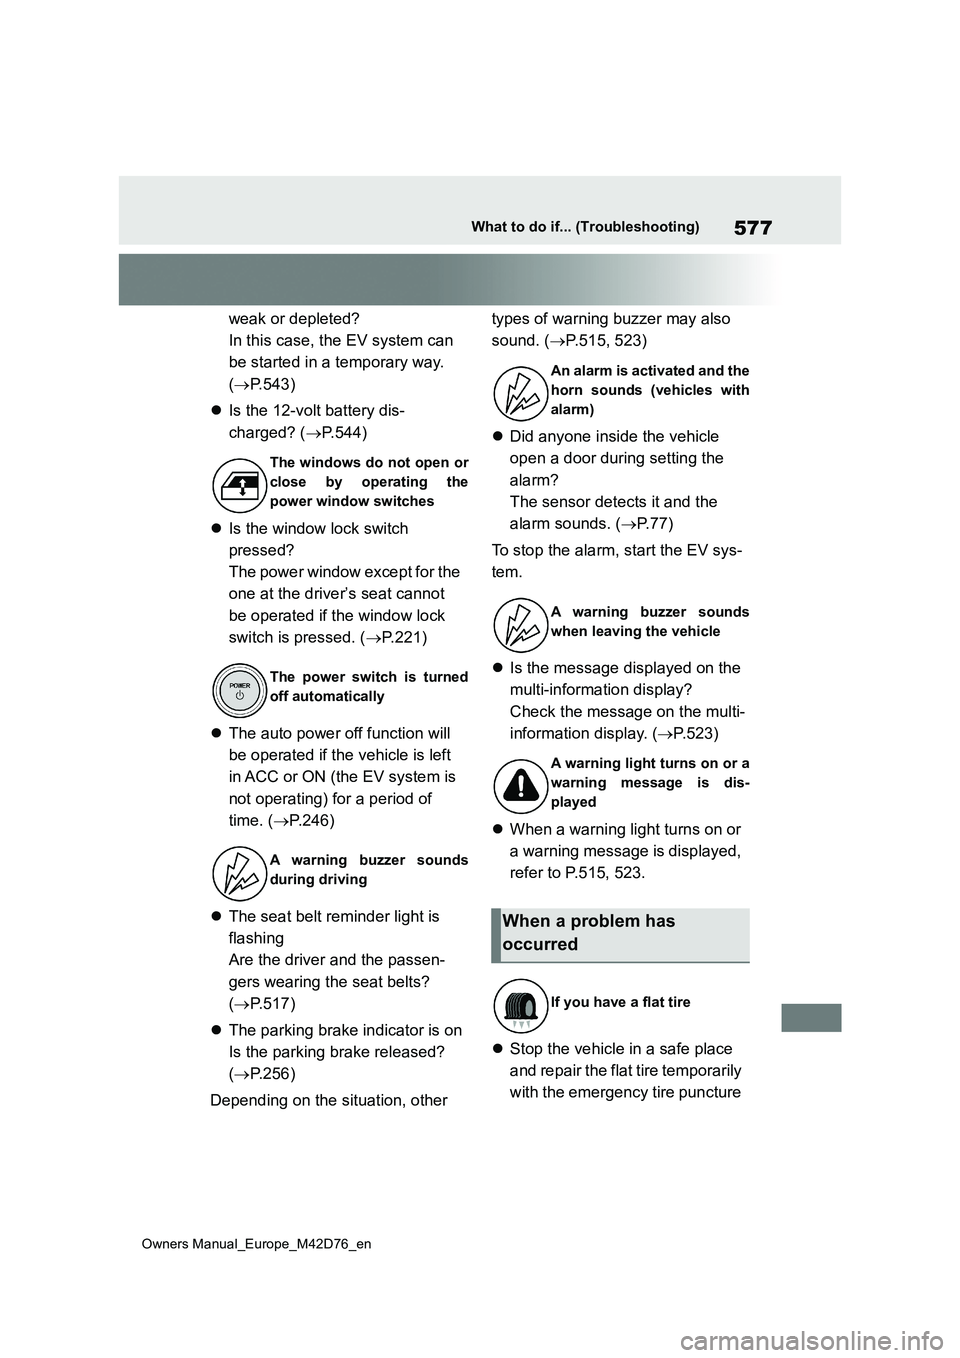 TOYOTA BZ4X 2022  Owners Manual (in English) 577
Owners Manual_Europe_M42D76_en
What to do if... (Troubleshooting)
weak or depleted? 
In this case, the EV system can  
be started in a temporary way.  
( P.543) 
 Is the 12-volt battery dis-